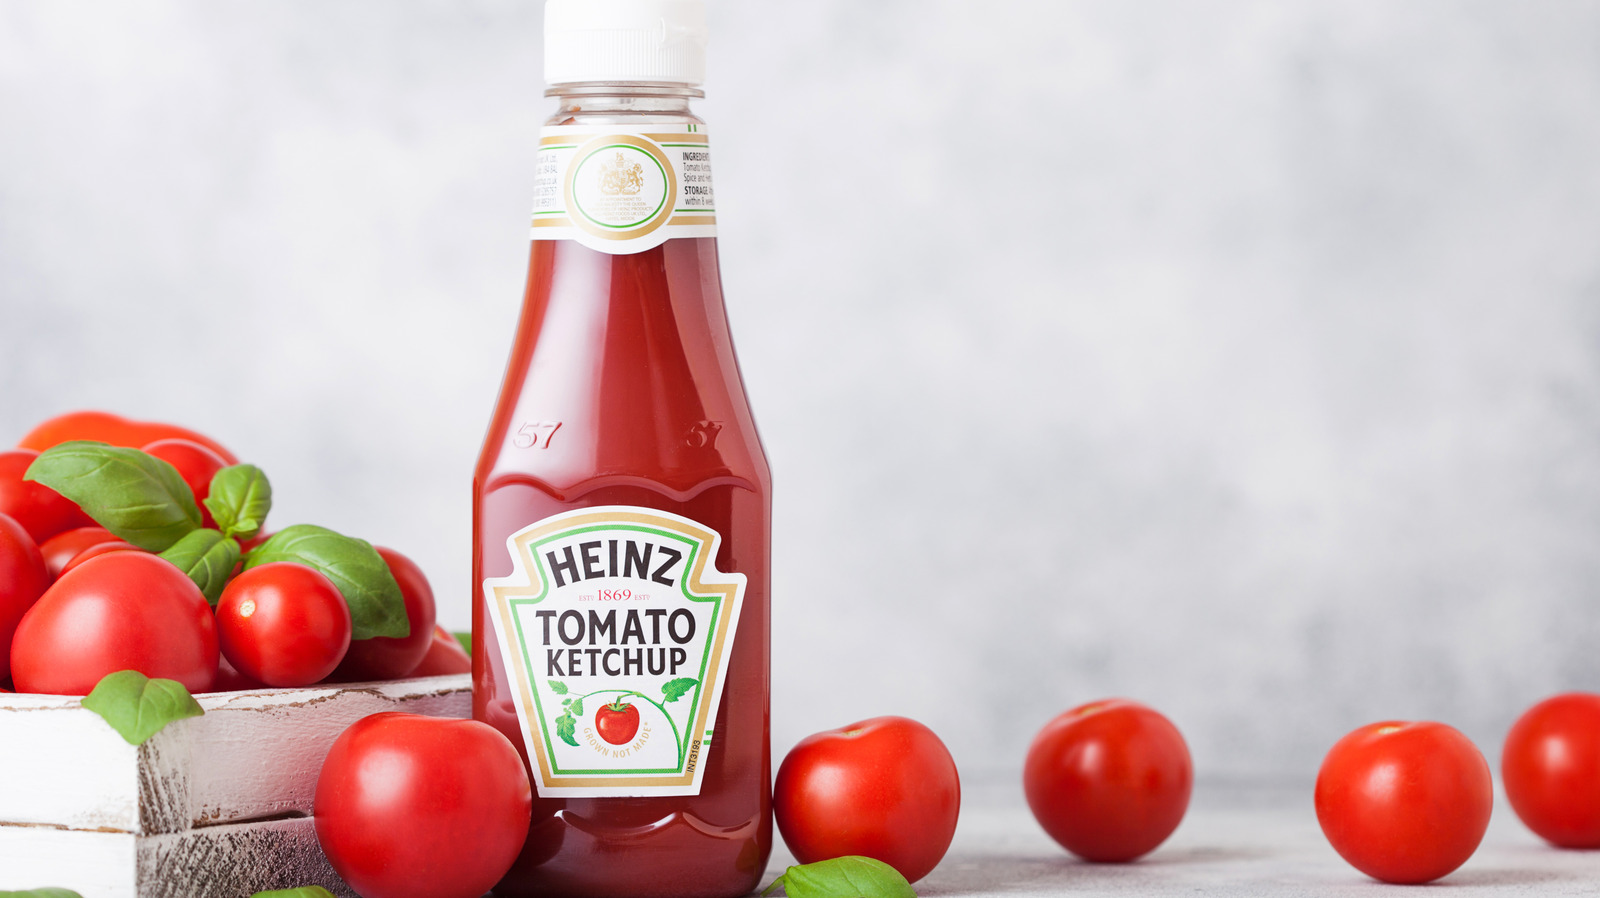 What’s the UK’s favourite brand of tomato ketchup?